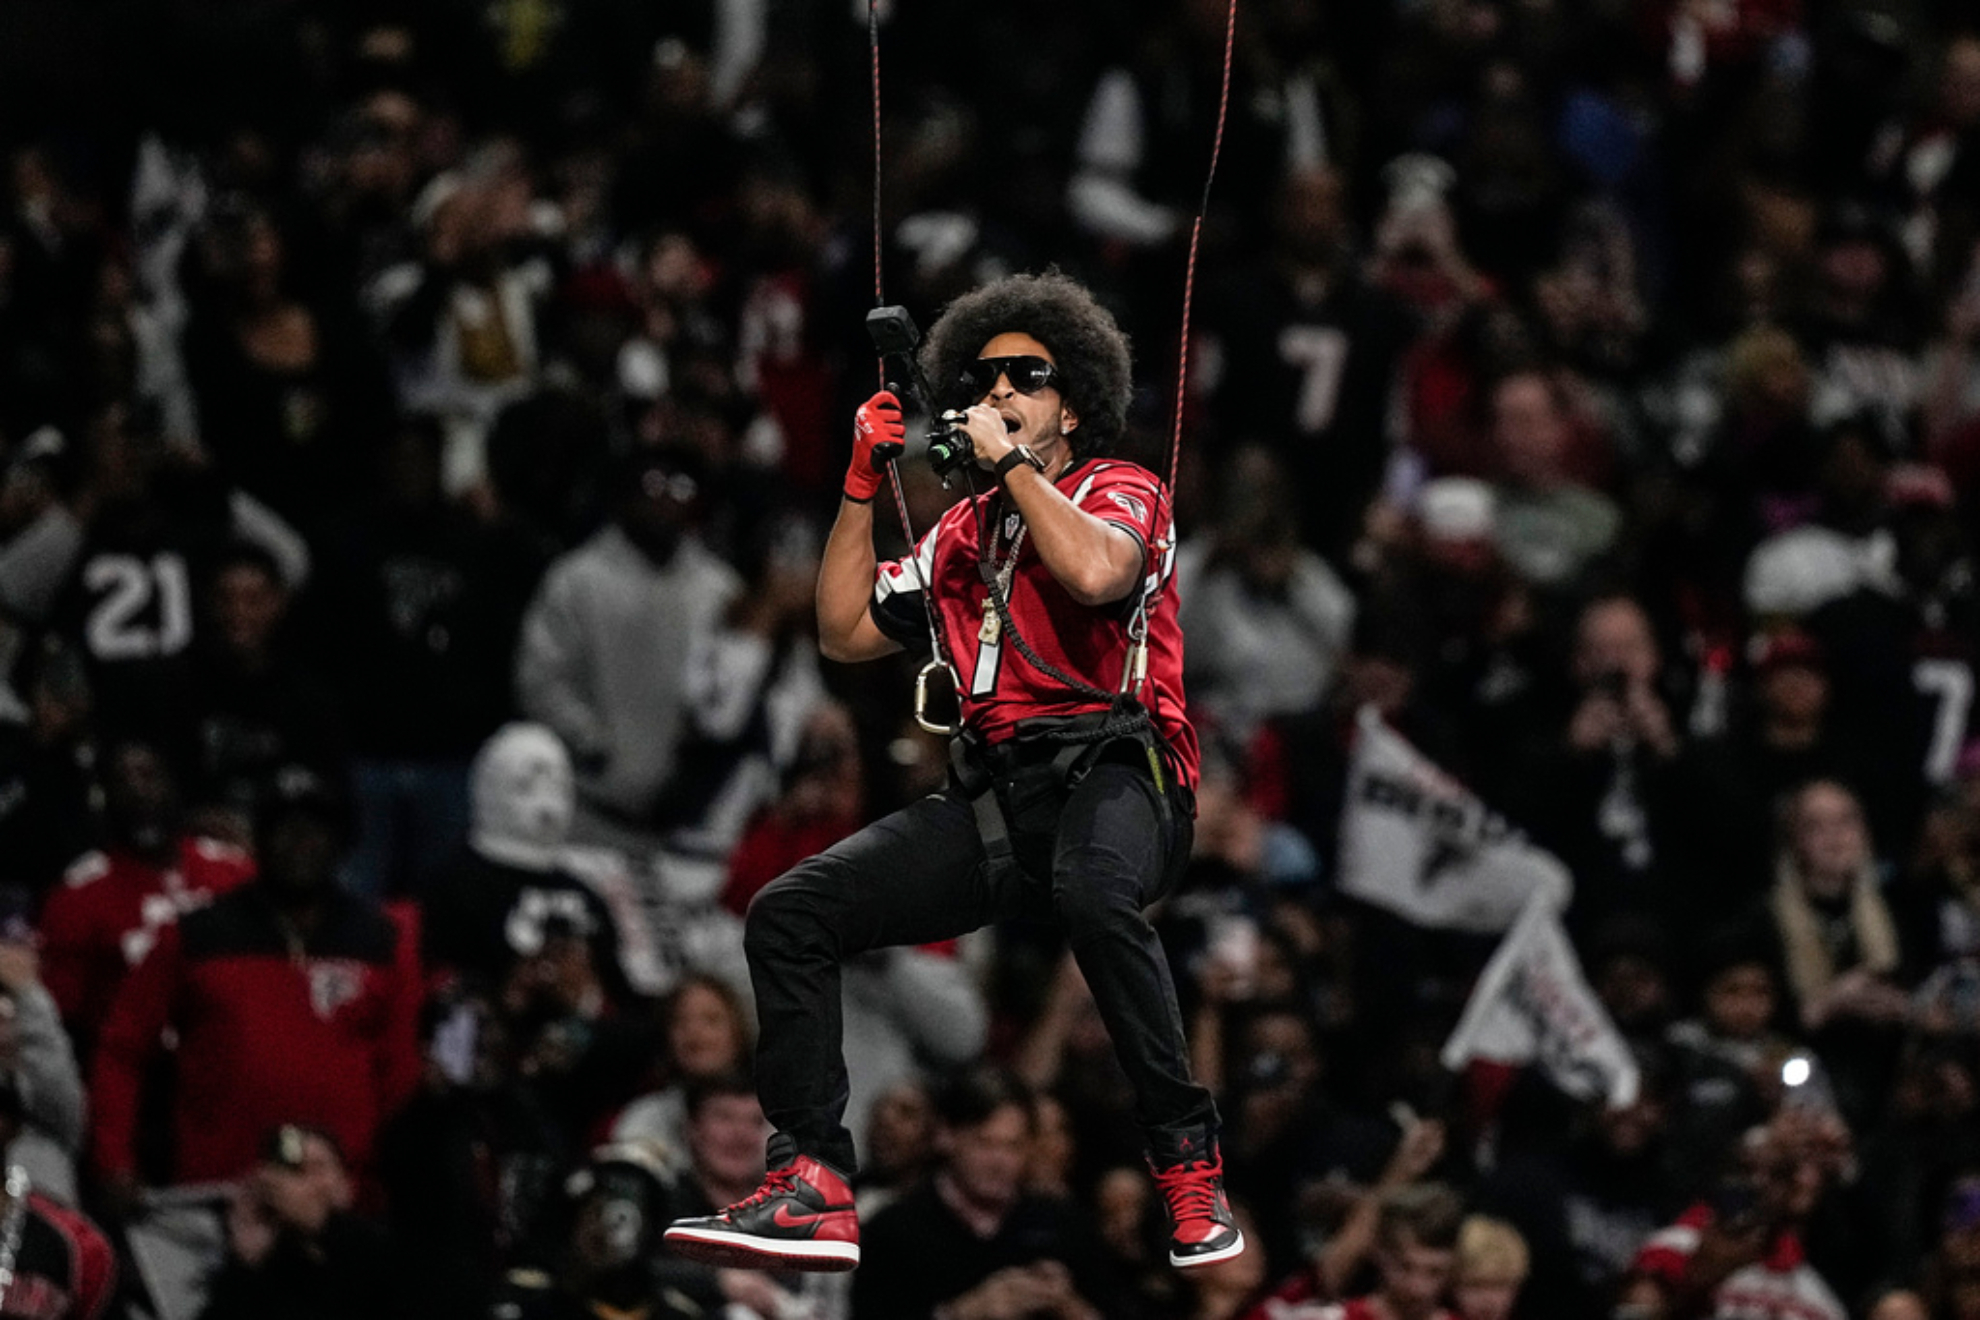 Ludacris shocks fans by ziplining into Mercedes Benz stadium during 3Q of Falcons game